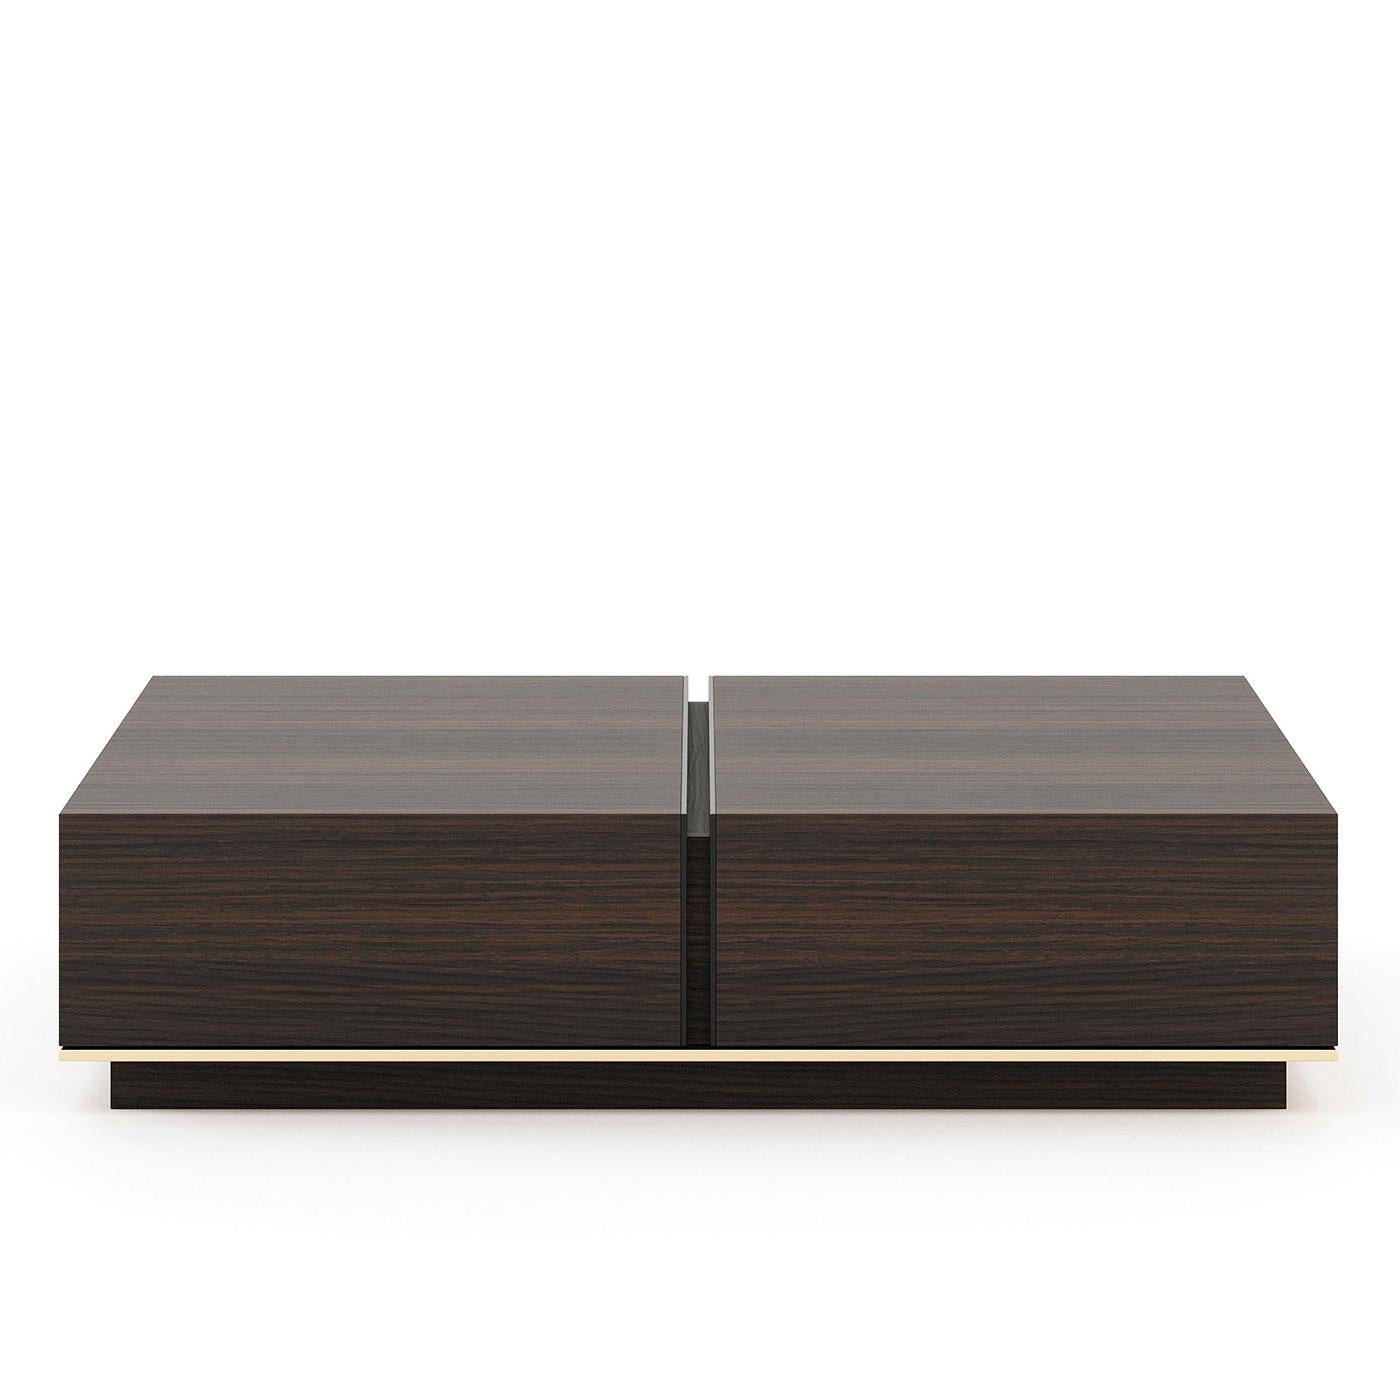 Coffee Table Jino with wooden structure in veneered oak 
in smocked matte finish. Openable coffee table in 2 parts, 
with easy glide system. With polished stainless steel trim. 
Wooden base in veneered oak in smocked matte finish.
Also available